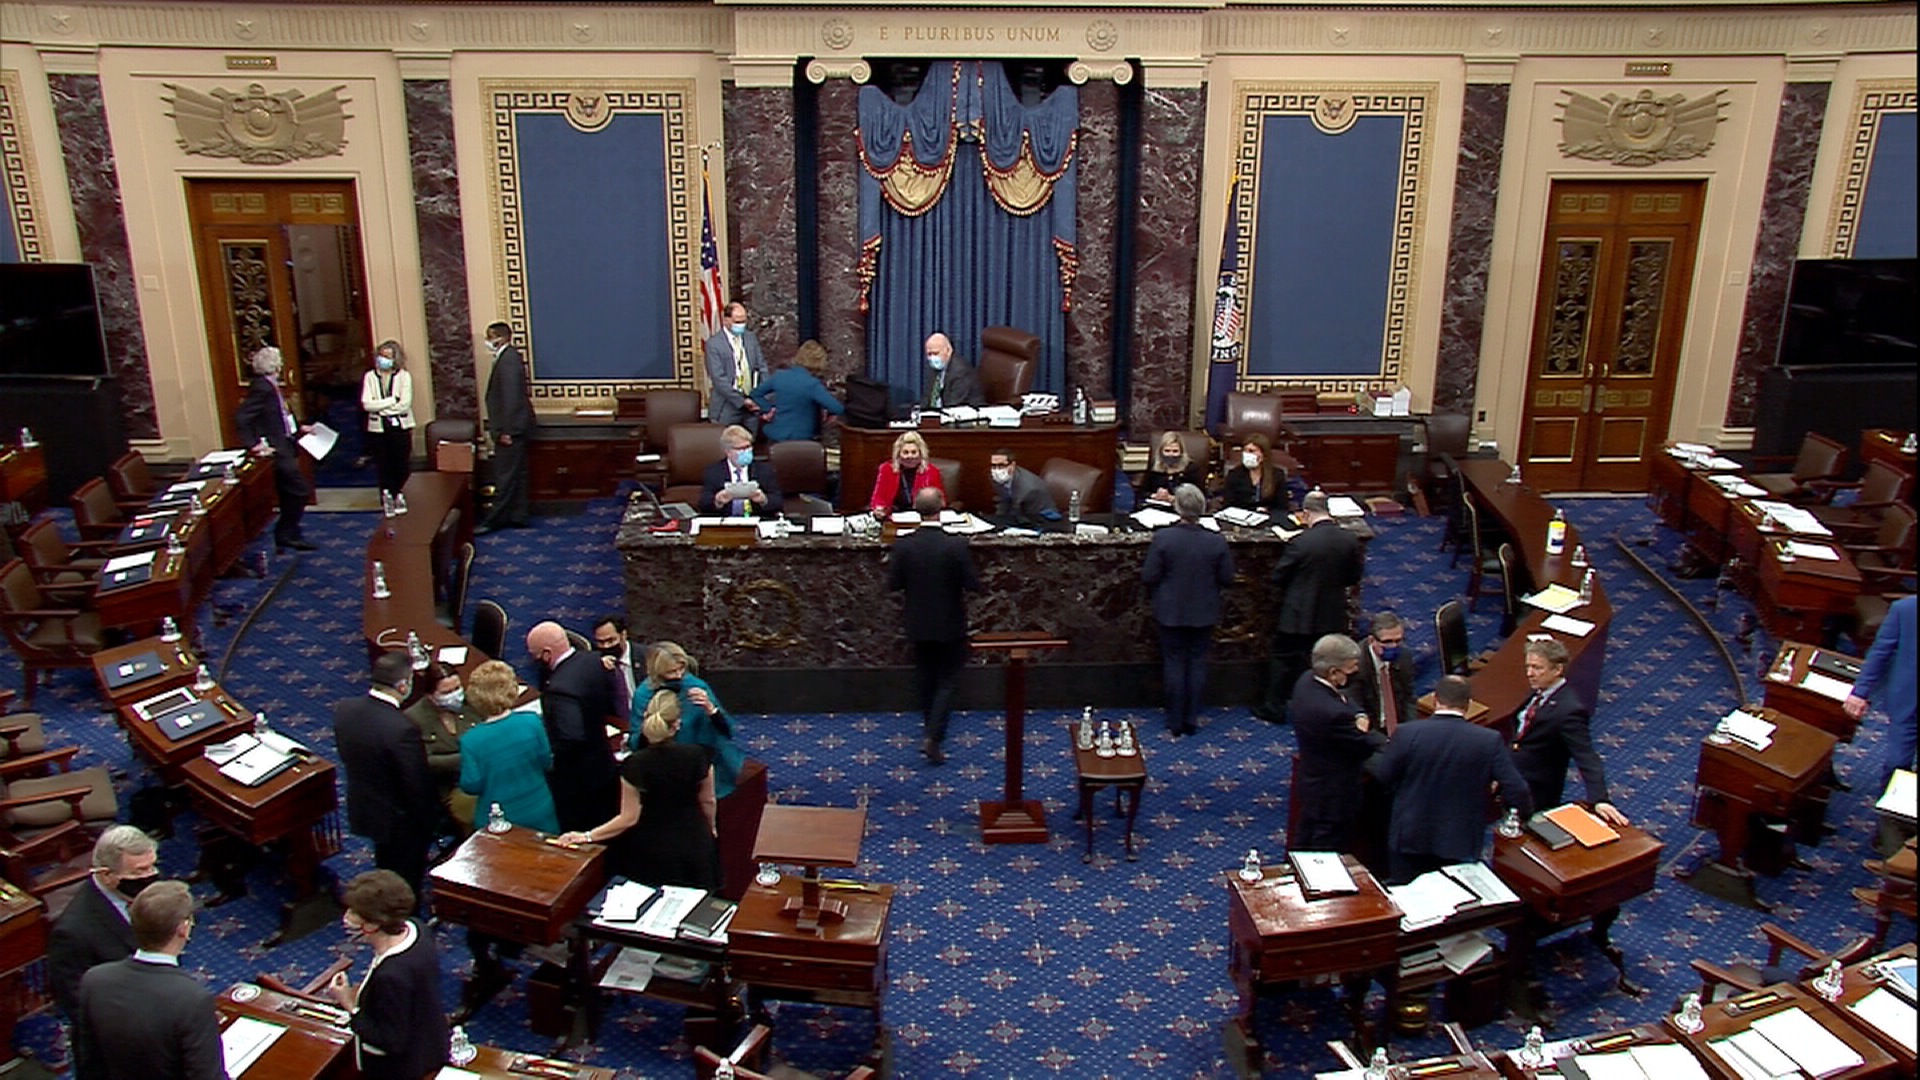 Here's what's happening on the Senate floor now following the witness vote